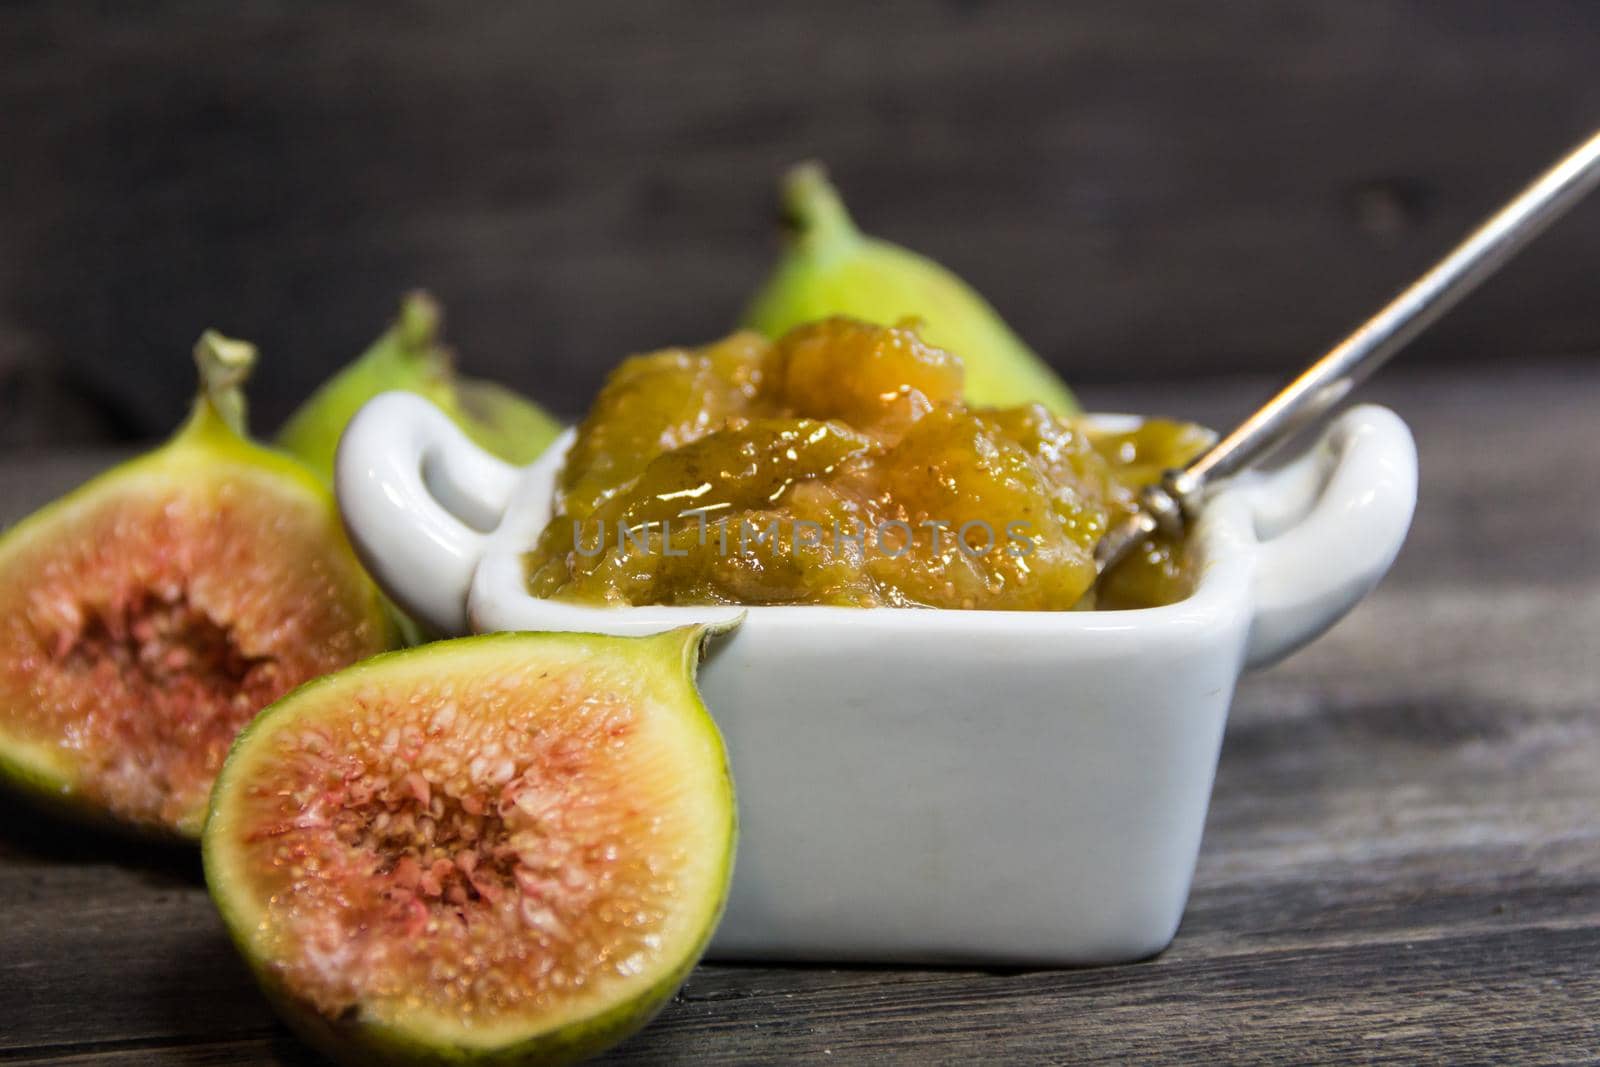 Homemade sweet of green figs. fig jam on rustic wooden background by GabrielaBertolini